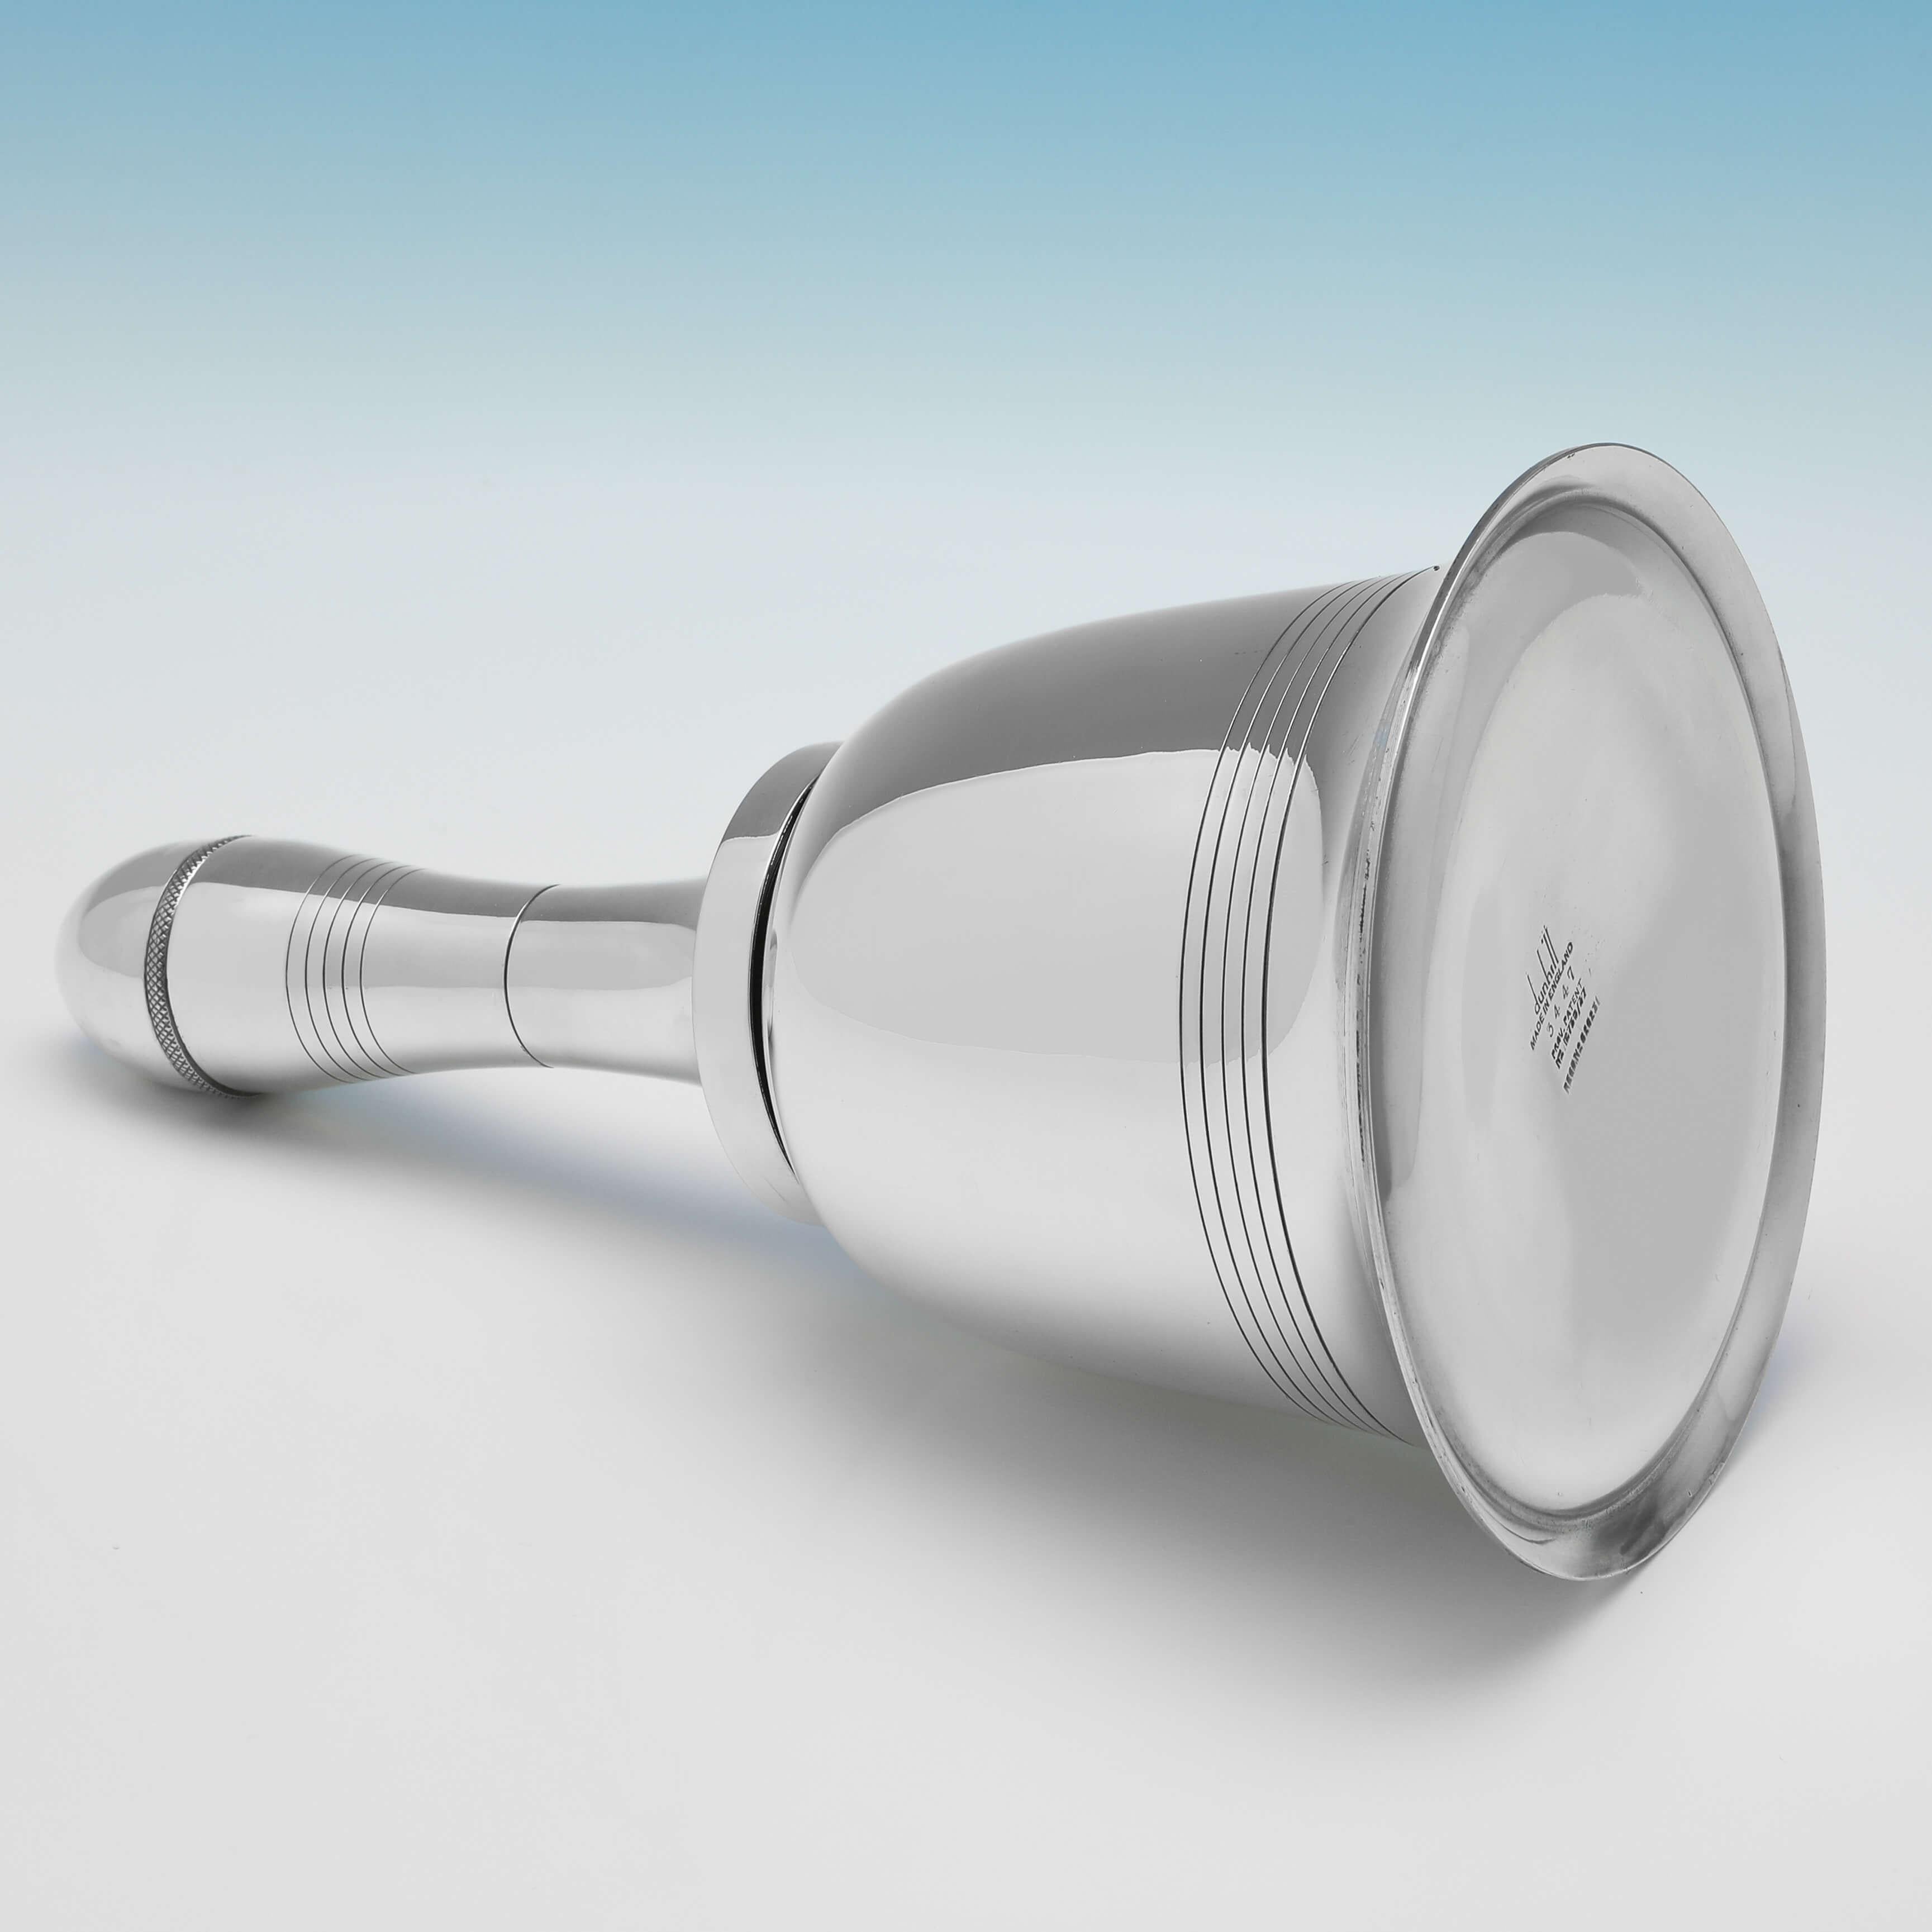 Made circa 1930 by Dunhill, this stylish, novelty, Silver Plate Cocktail Shaker, is modelled as a bell. The cocktail shaker measures 10.75